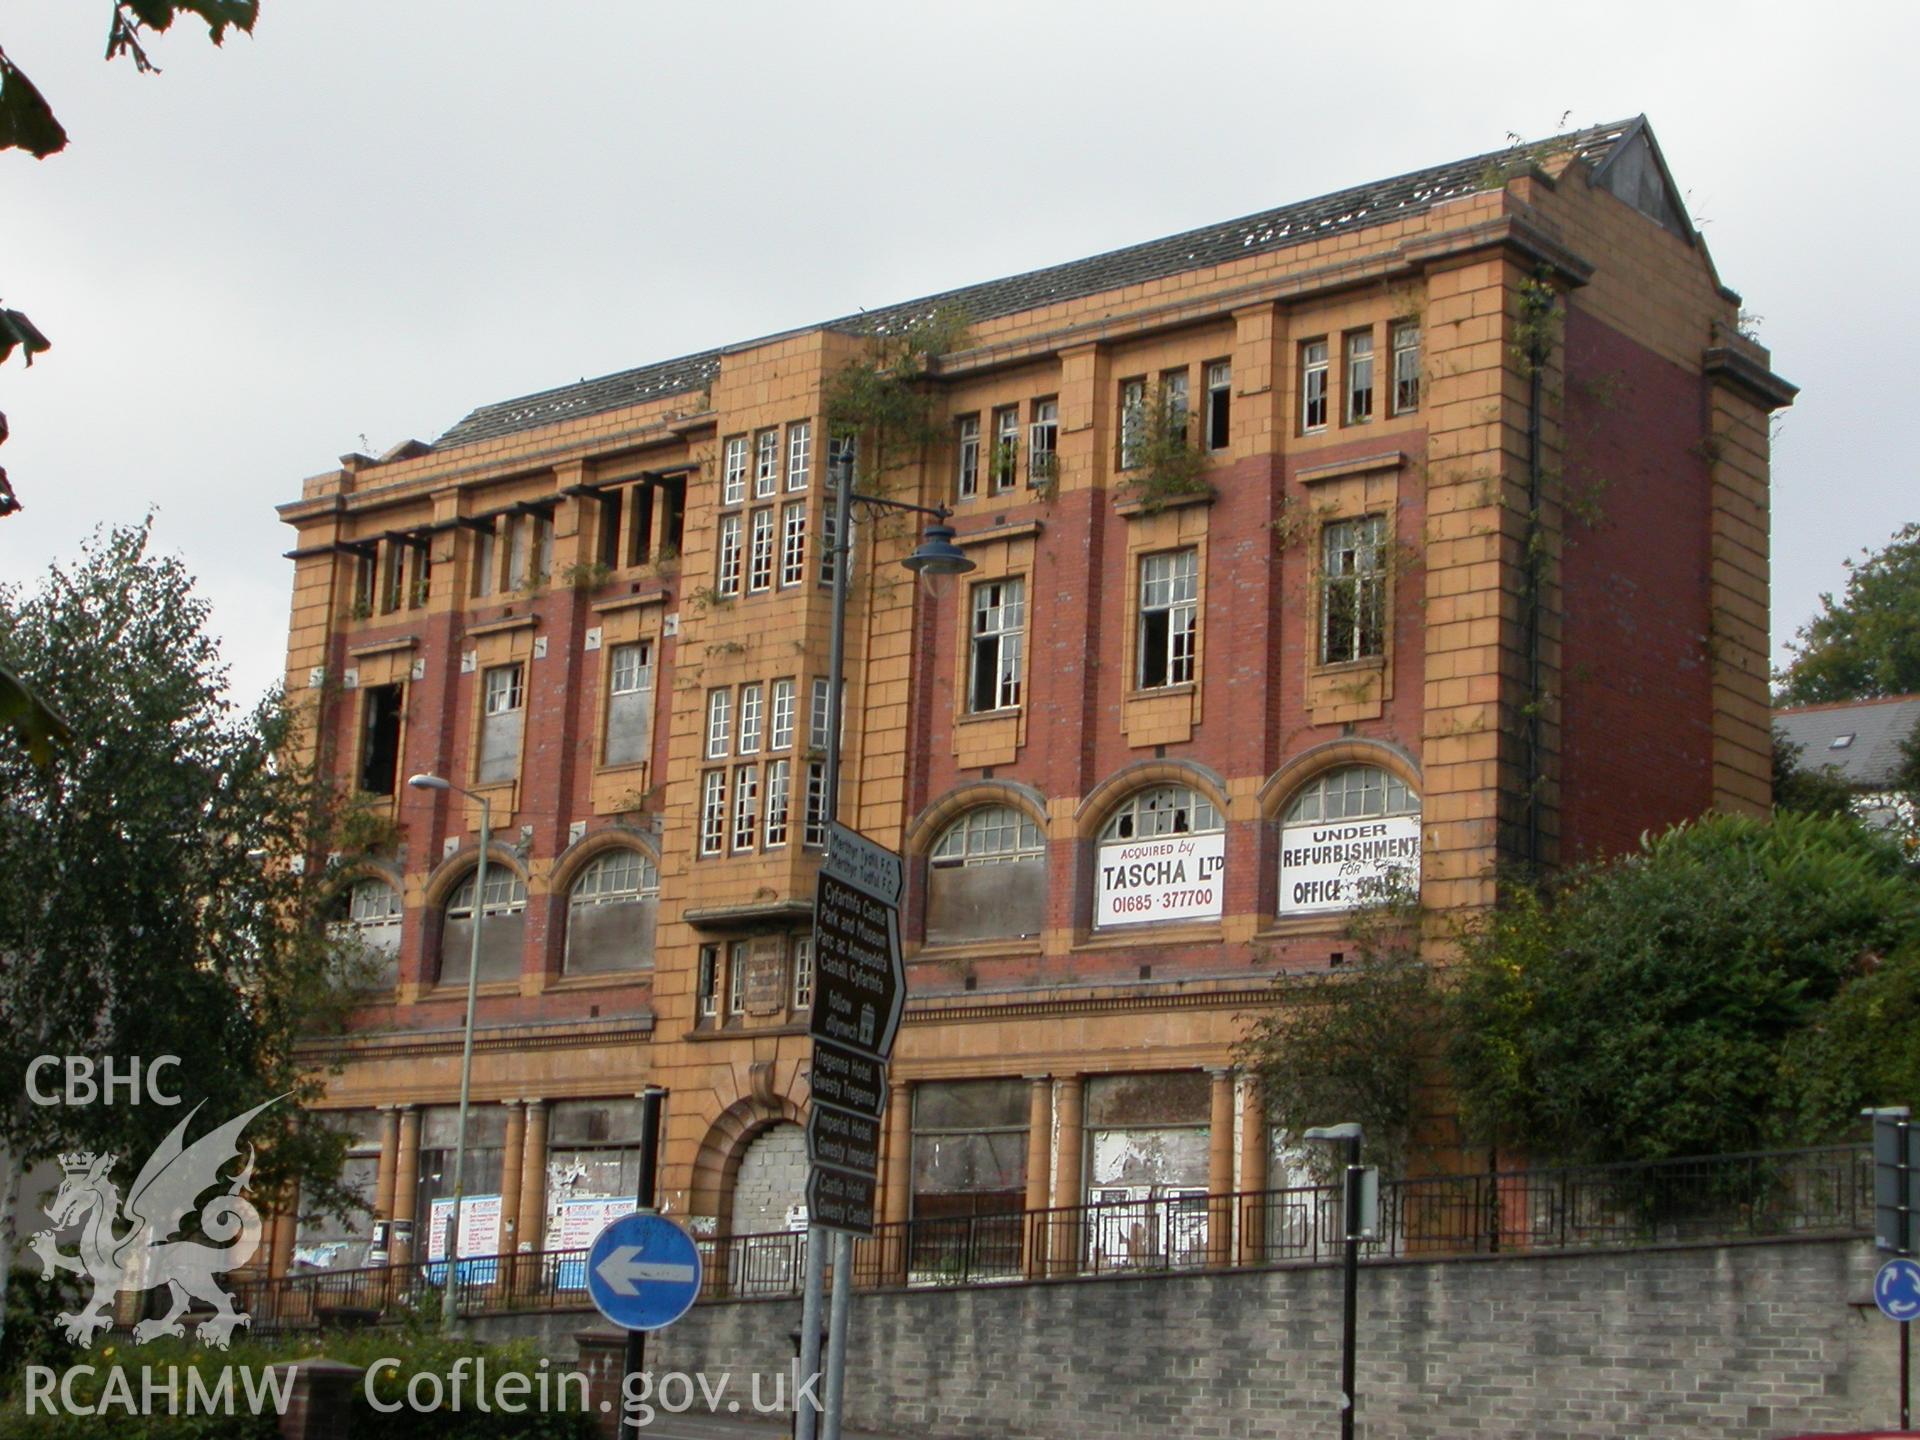 Colour photograph of the exterior of the YMCA Building, Pontmorlais Road, Merthyr Tydfil. Photographed during survey conducted by Geoff Ward on the 26th September 2005.